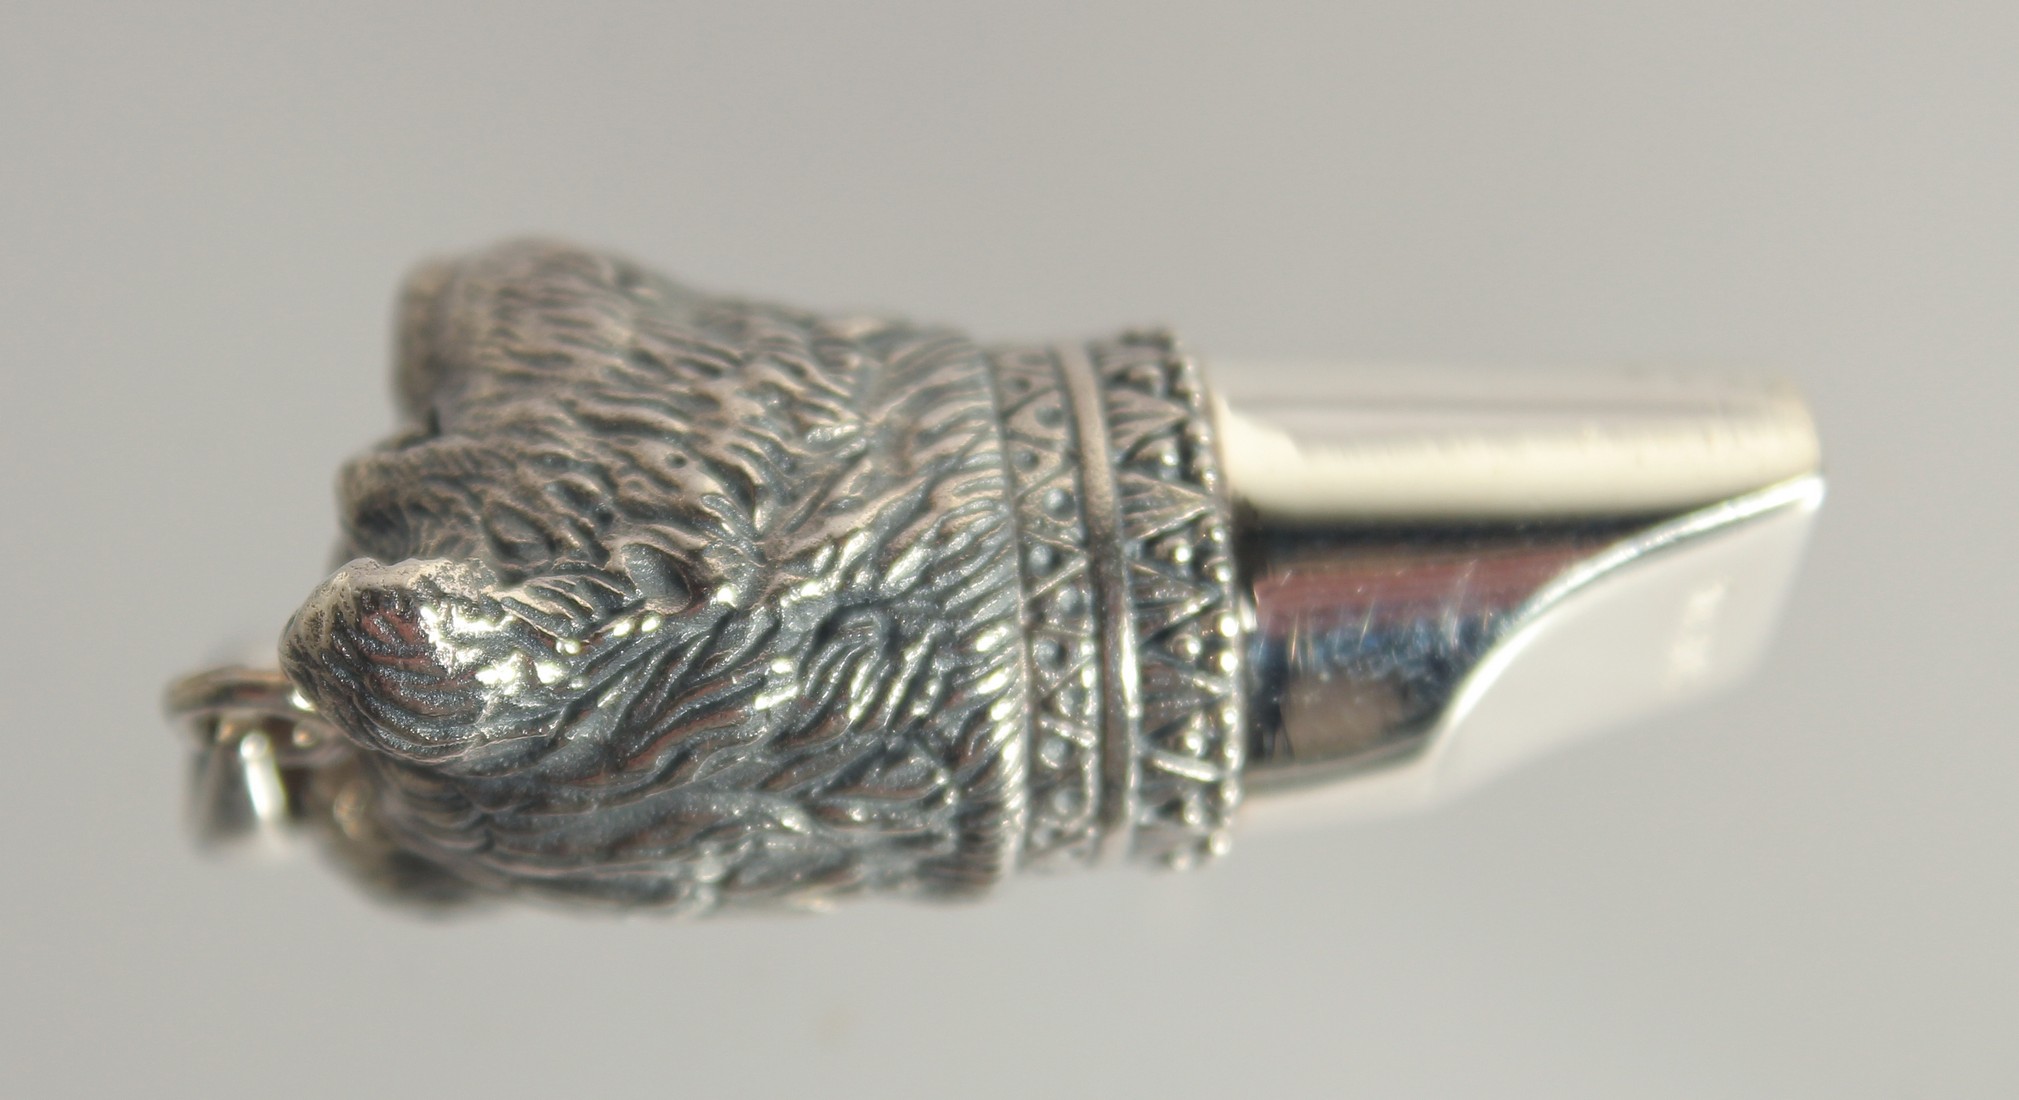 A SILVER NOVELTY BEAR WHISTLE, 1.5" long. - Image 2 of 2